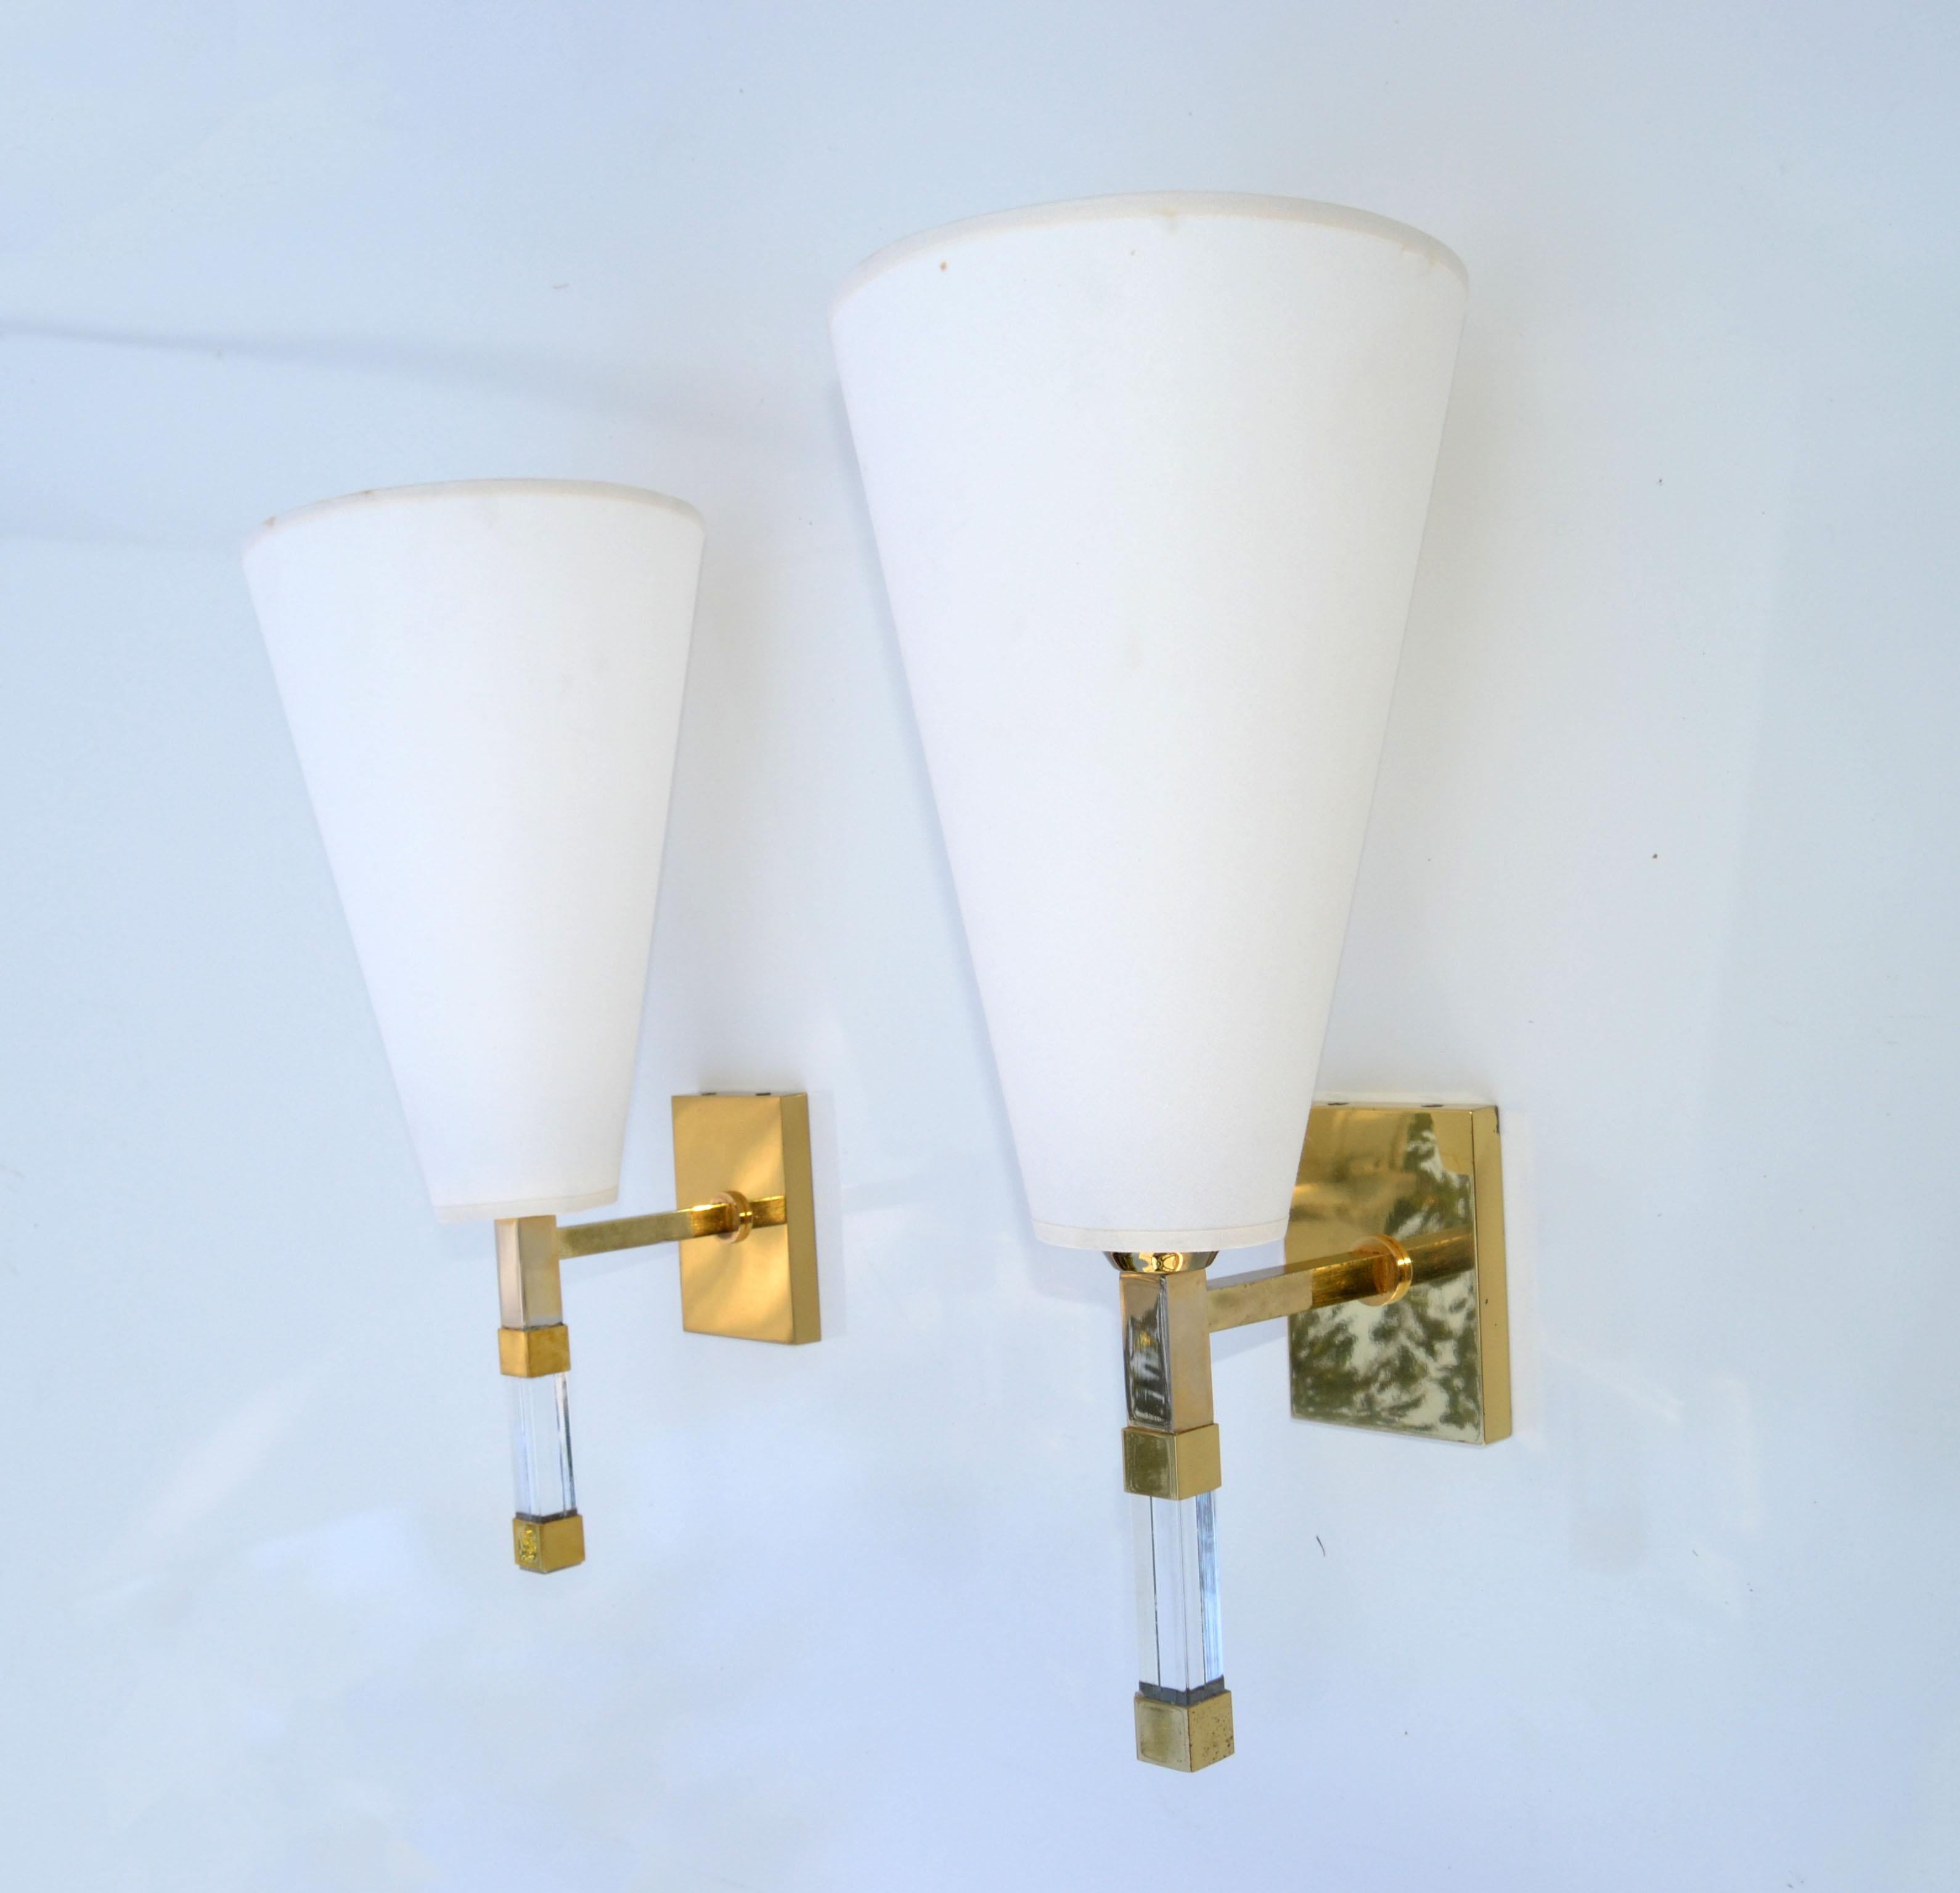 Superb pair of polished Brass and Lucite Romeo Rega one light wall sconces.
The cone off-white shades are included.
We have 2 Pair available.
Working condition and each takes 1 max. 60 watts light bulb.
Back-plate dimension: 3.25 x 4.5